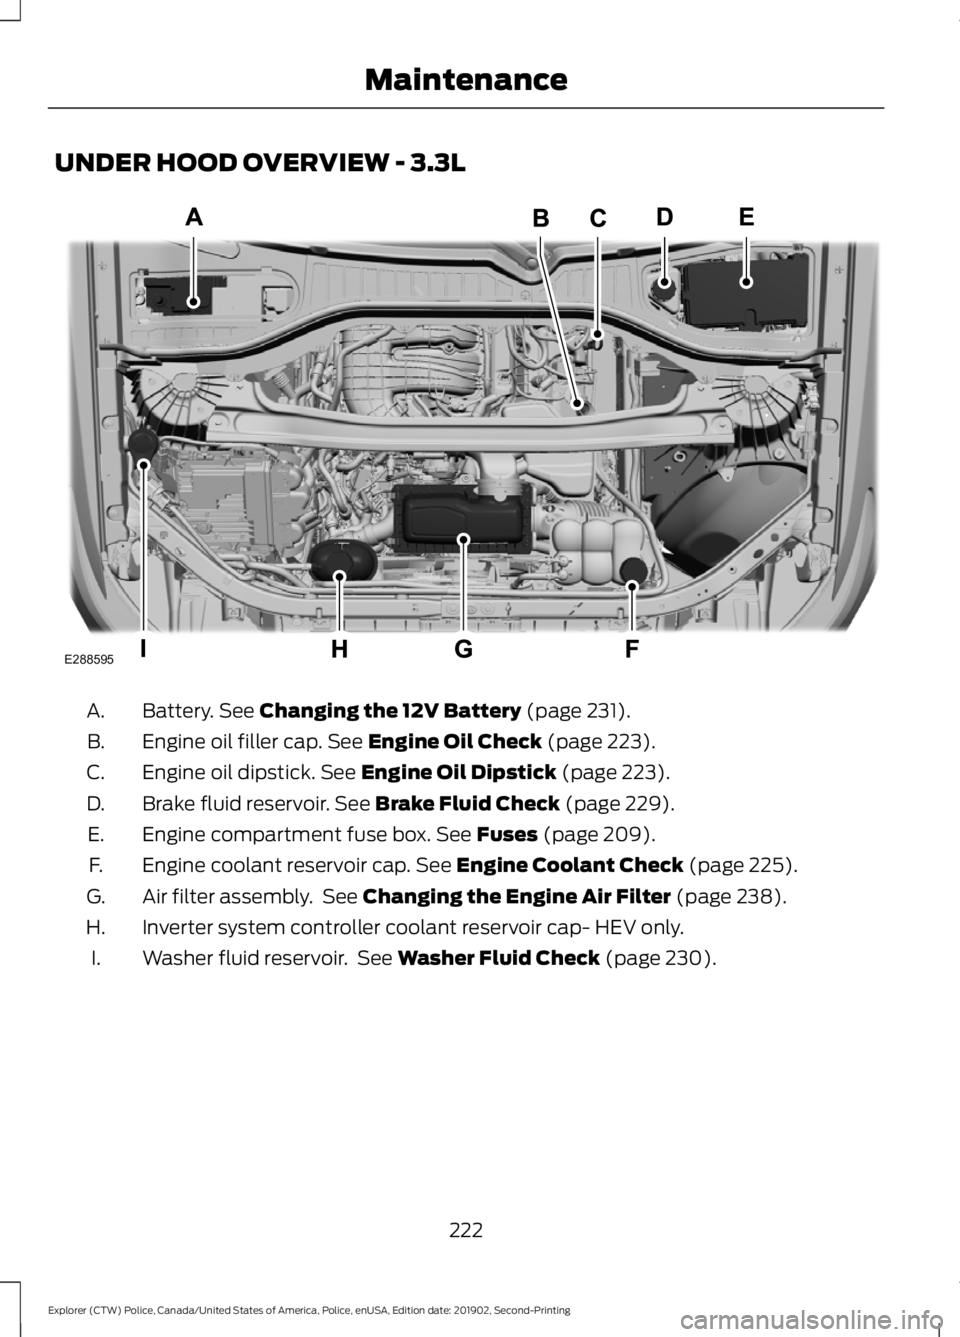 FORD POLICE INTERCEPTOR 2020  Owners Manual UNDER HOOD OVERVIEW - 3.3L
Battery. See Changing the 12V Battery (page 231).
A.
Engine oil filler cap.
 See Engine Oil Check (page 223).
B.
Engine oil dipstick.
 See Engine Oil Dipstick (page 223).
C.